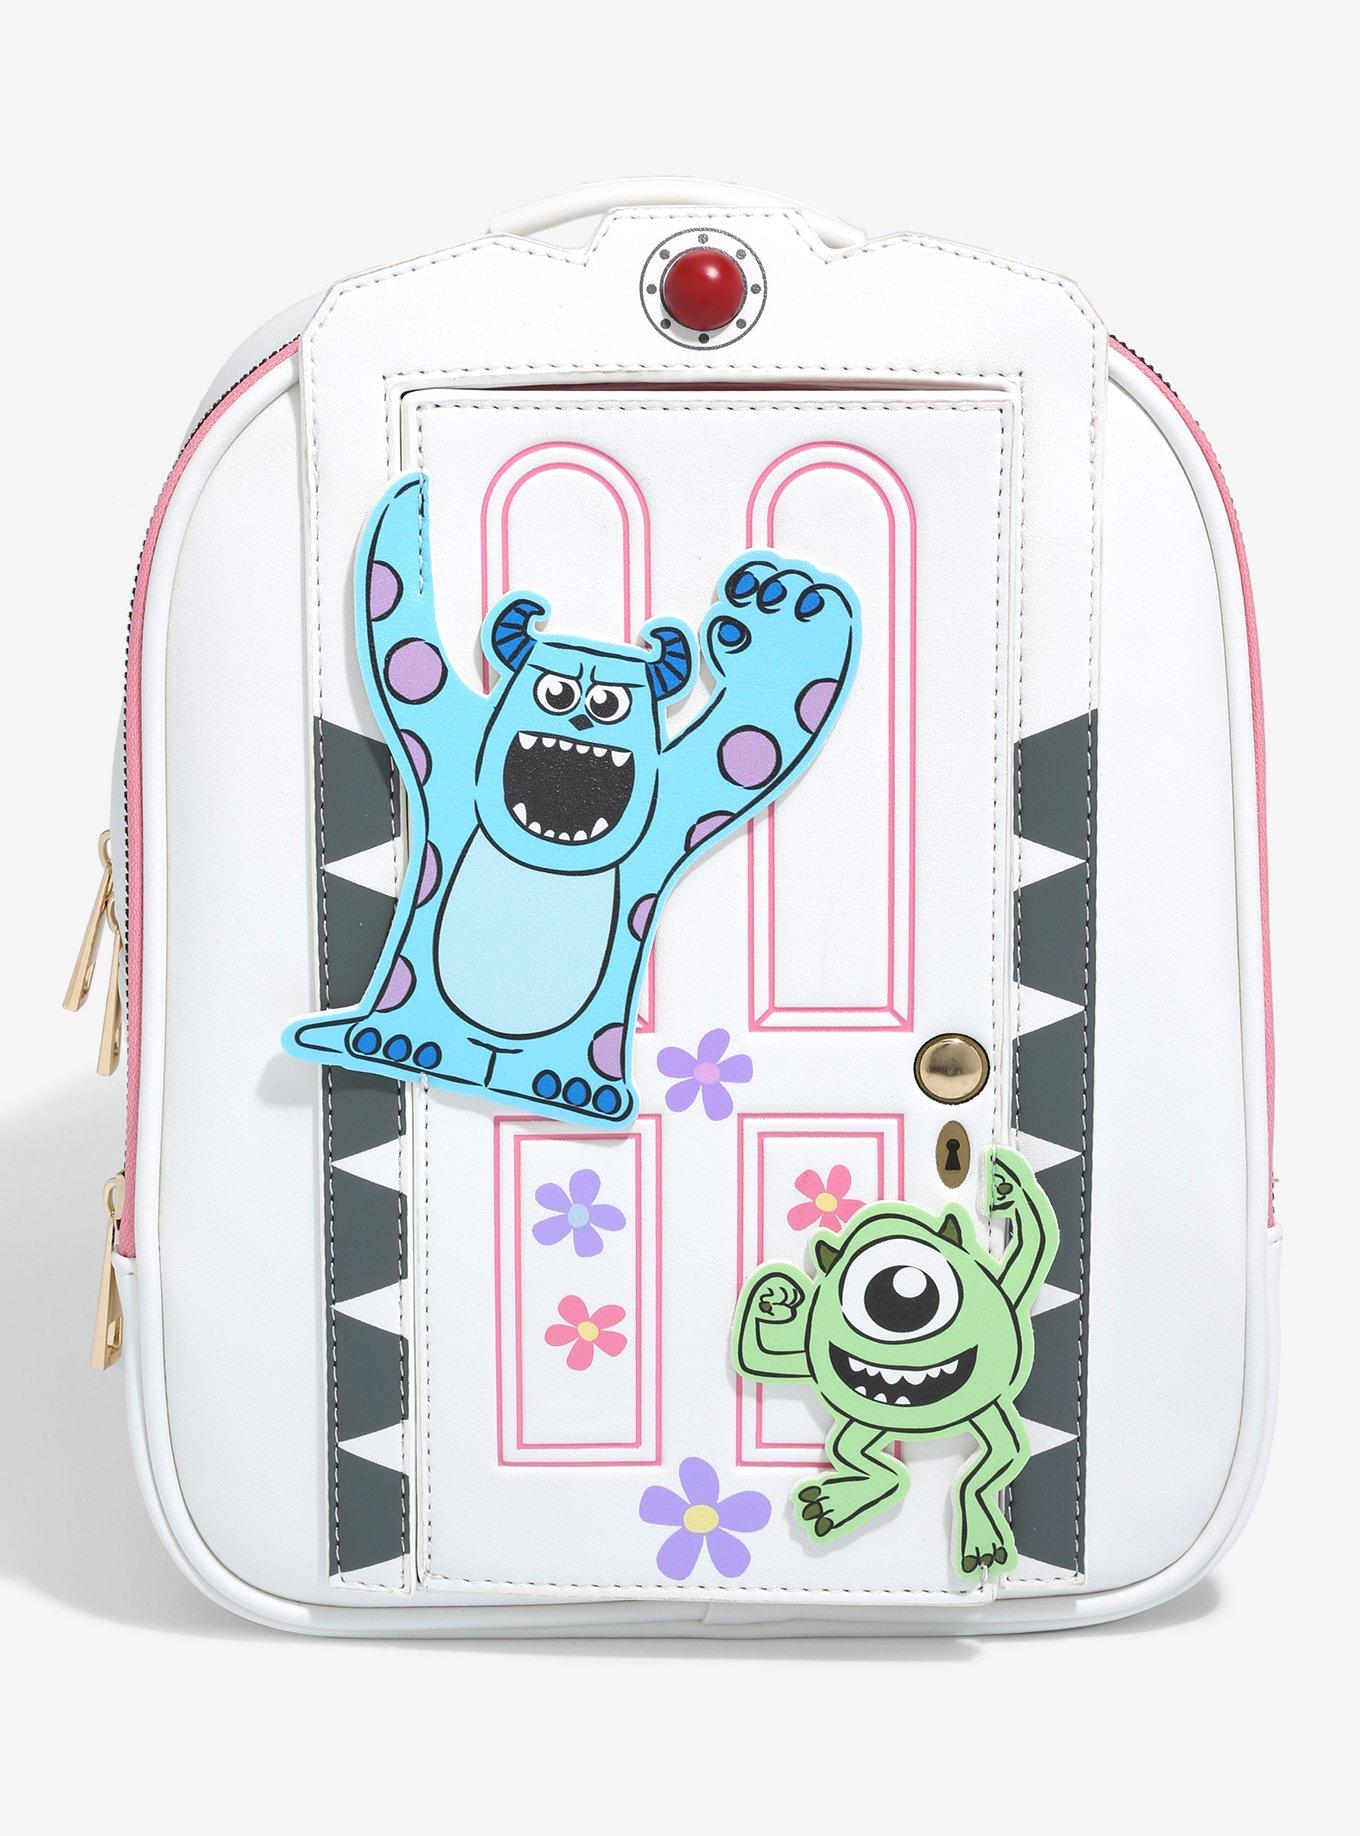 New Mike and Sulley Plush Purses Are So Cute It's Scary